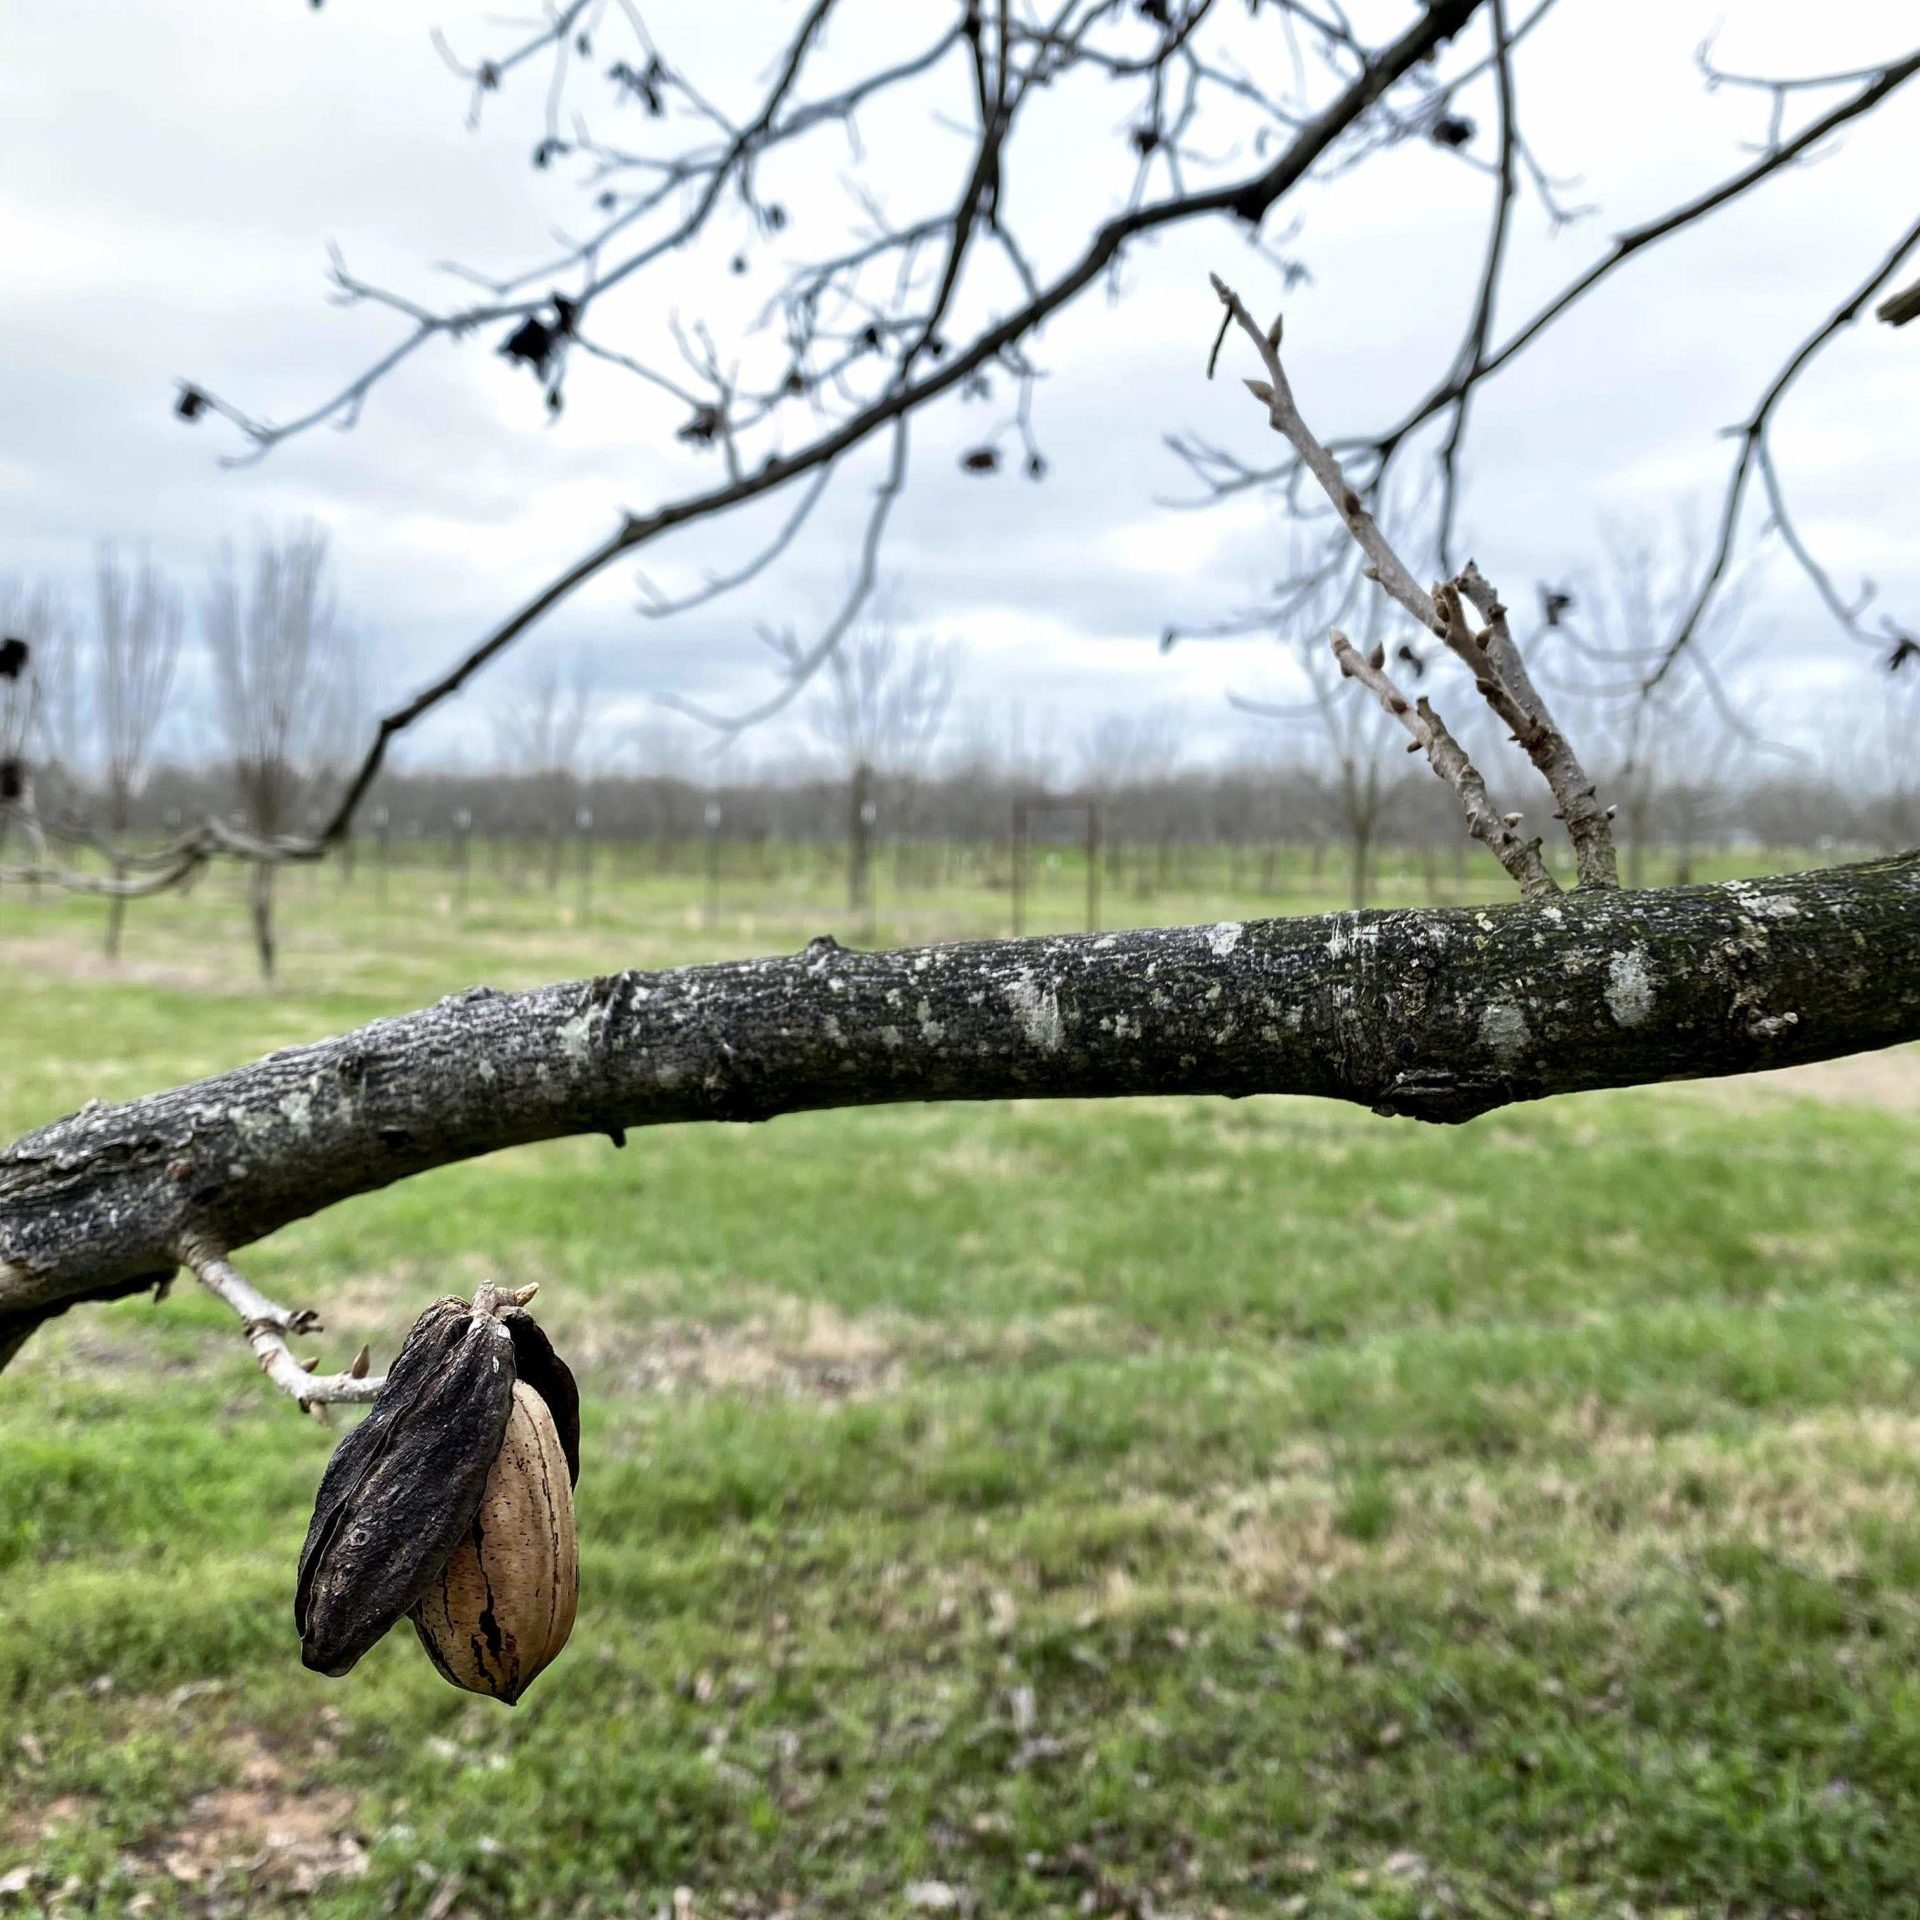 Left behind after harvest, a pecan hangs on a dormant tree in an orchard in College Station, Texas. The branch it is on cuts through the middle of the picture, while the tips of the tree's other branches dip into frame from the top.